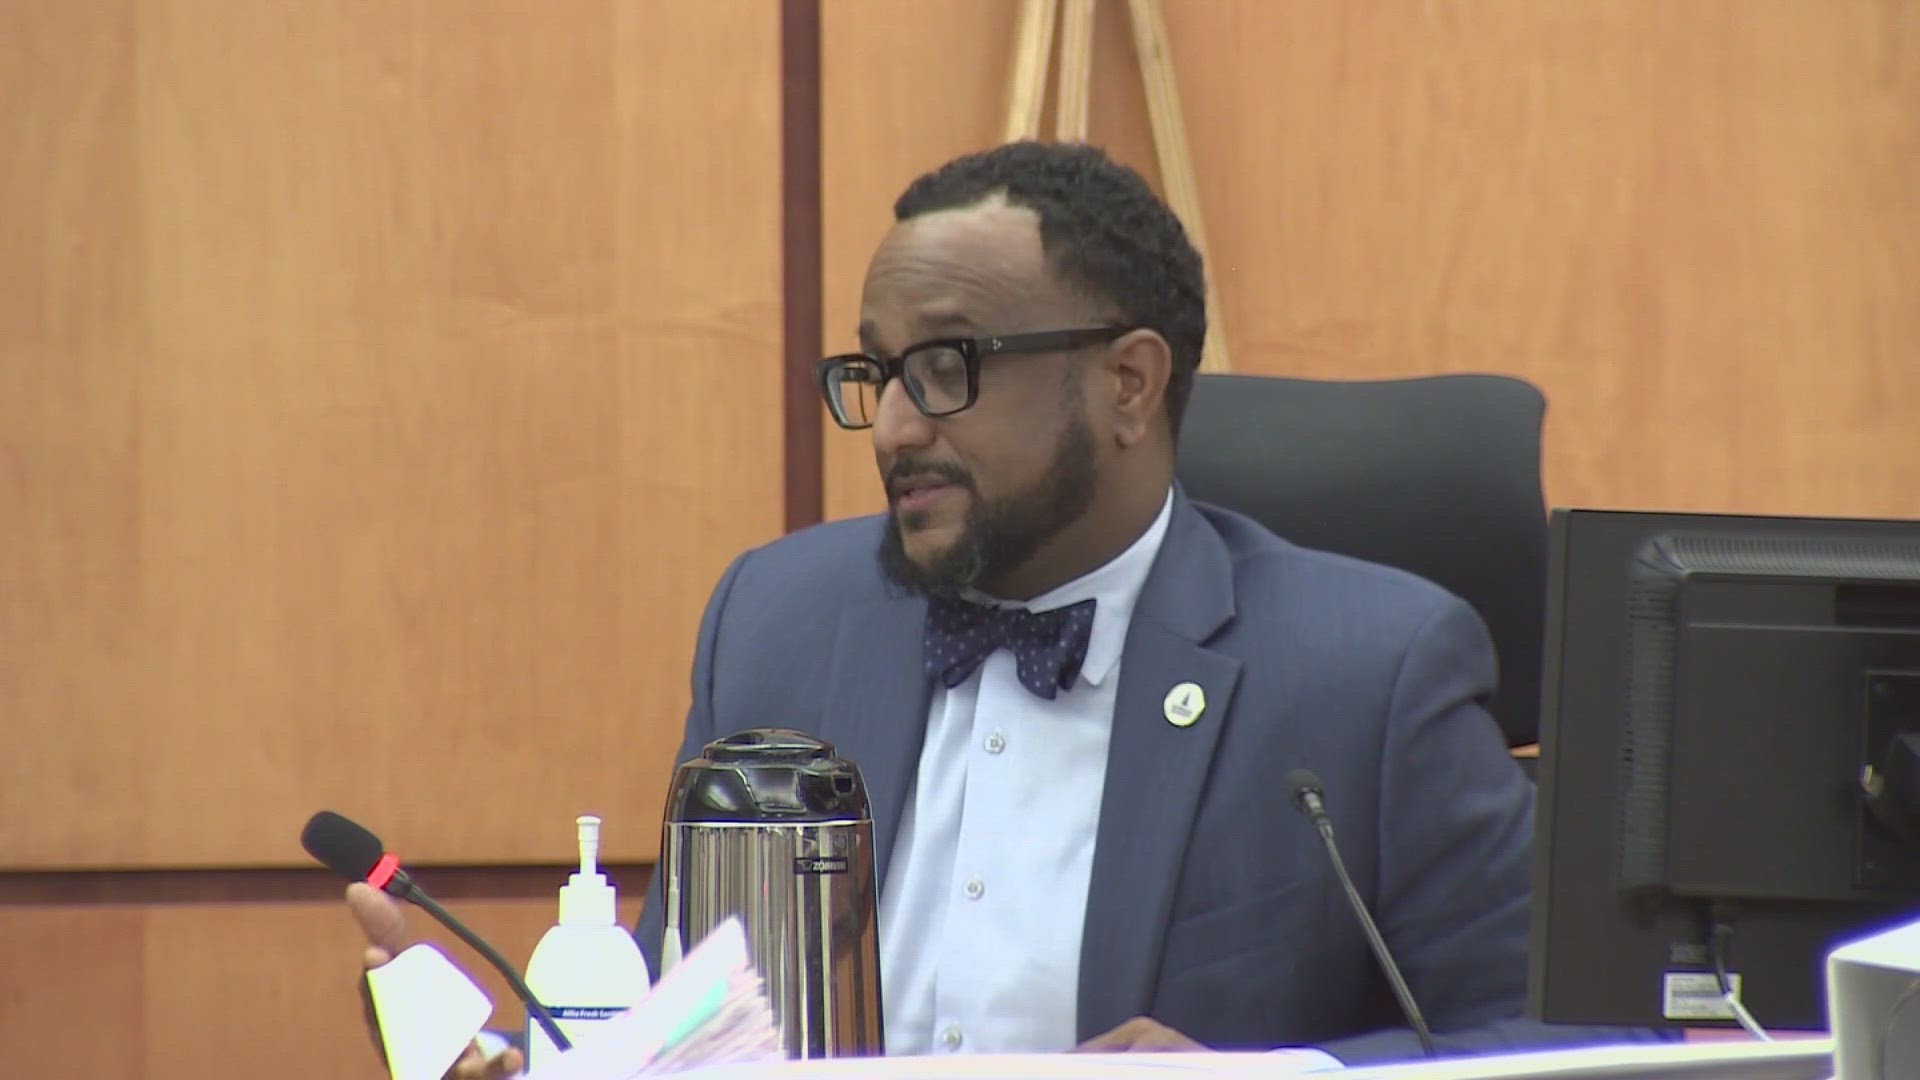 A forensic pathologist returned to the witness stand Monday to continue testifying in the trial for the death of Manuel Ellis.